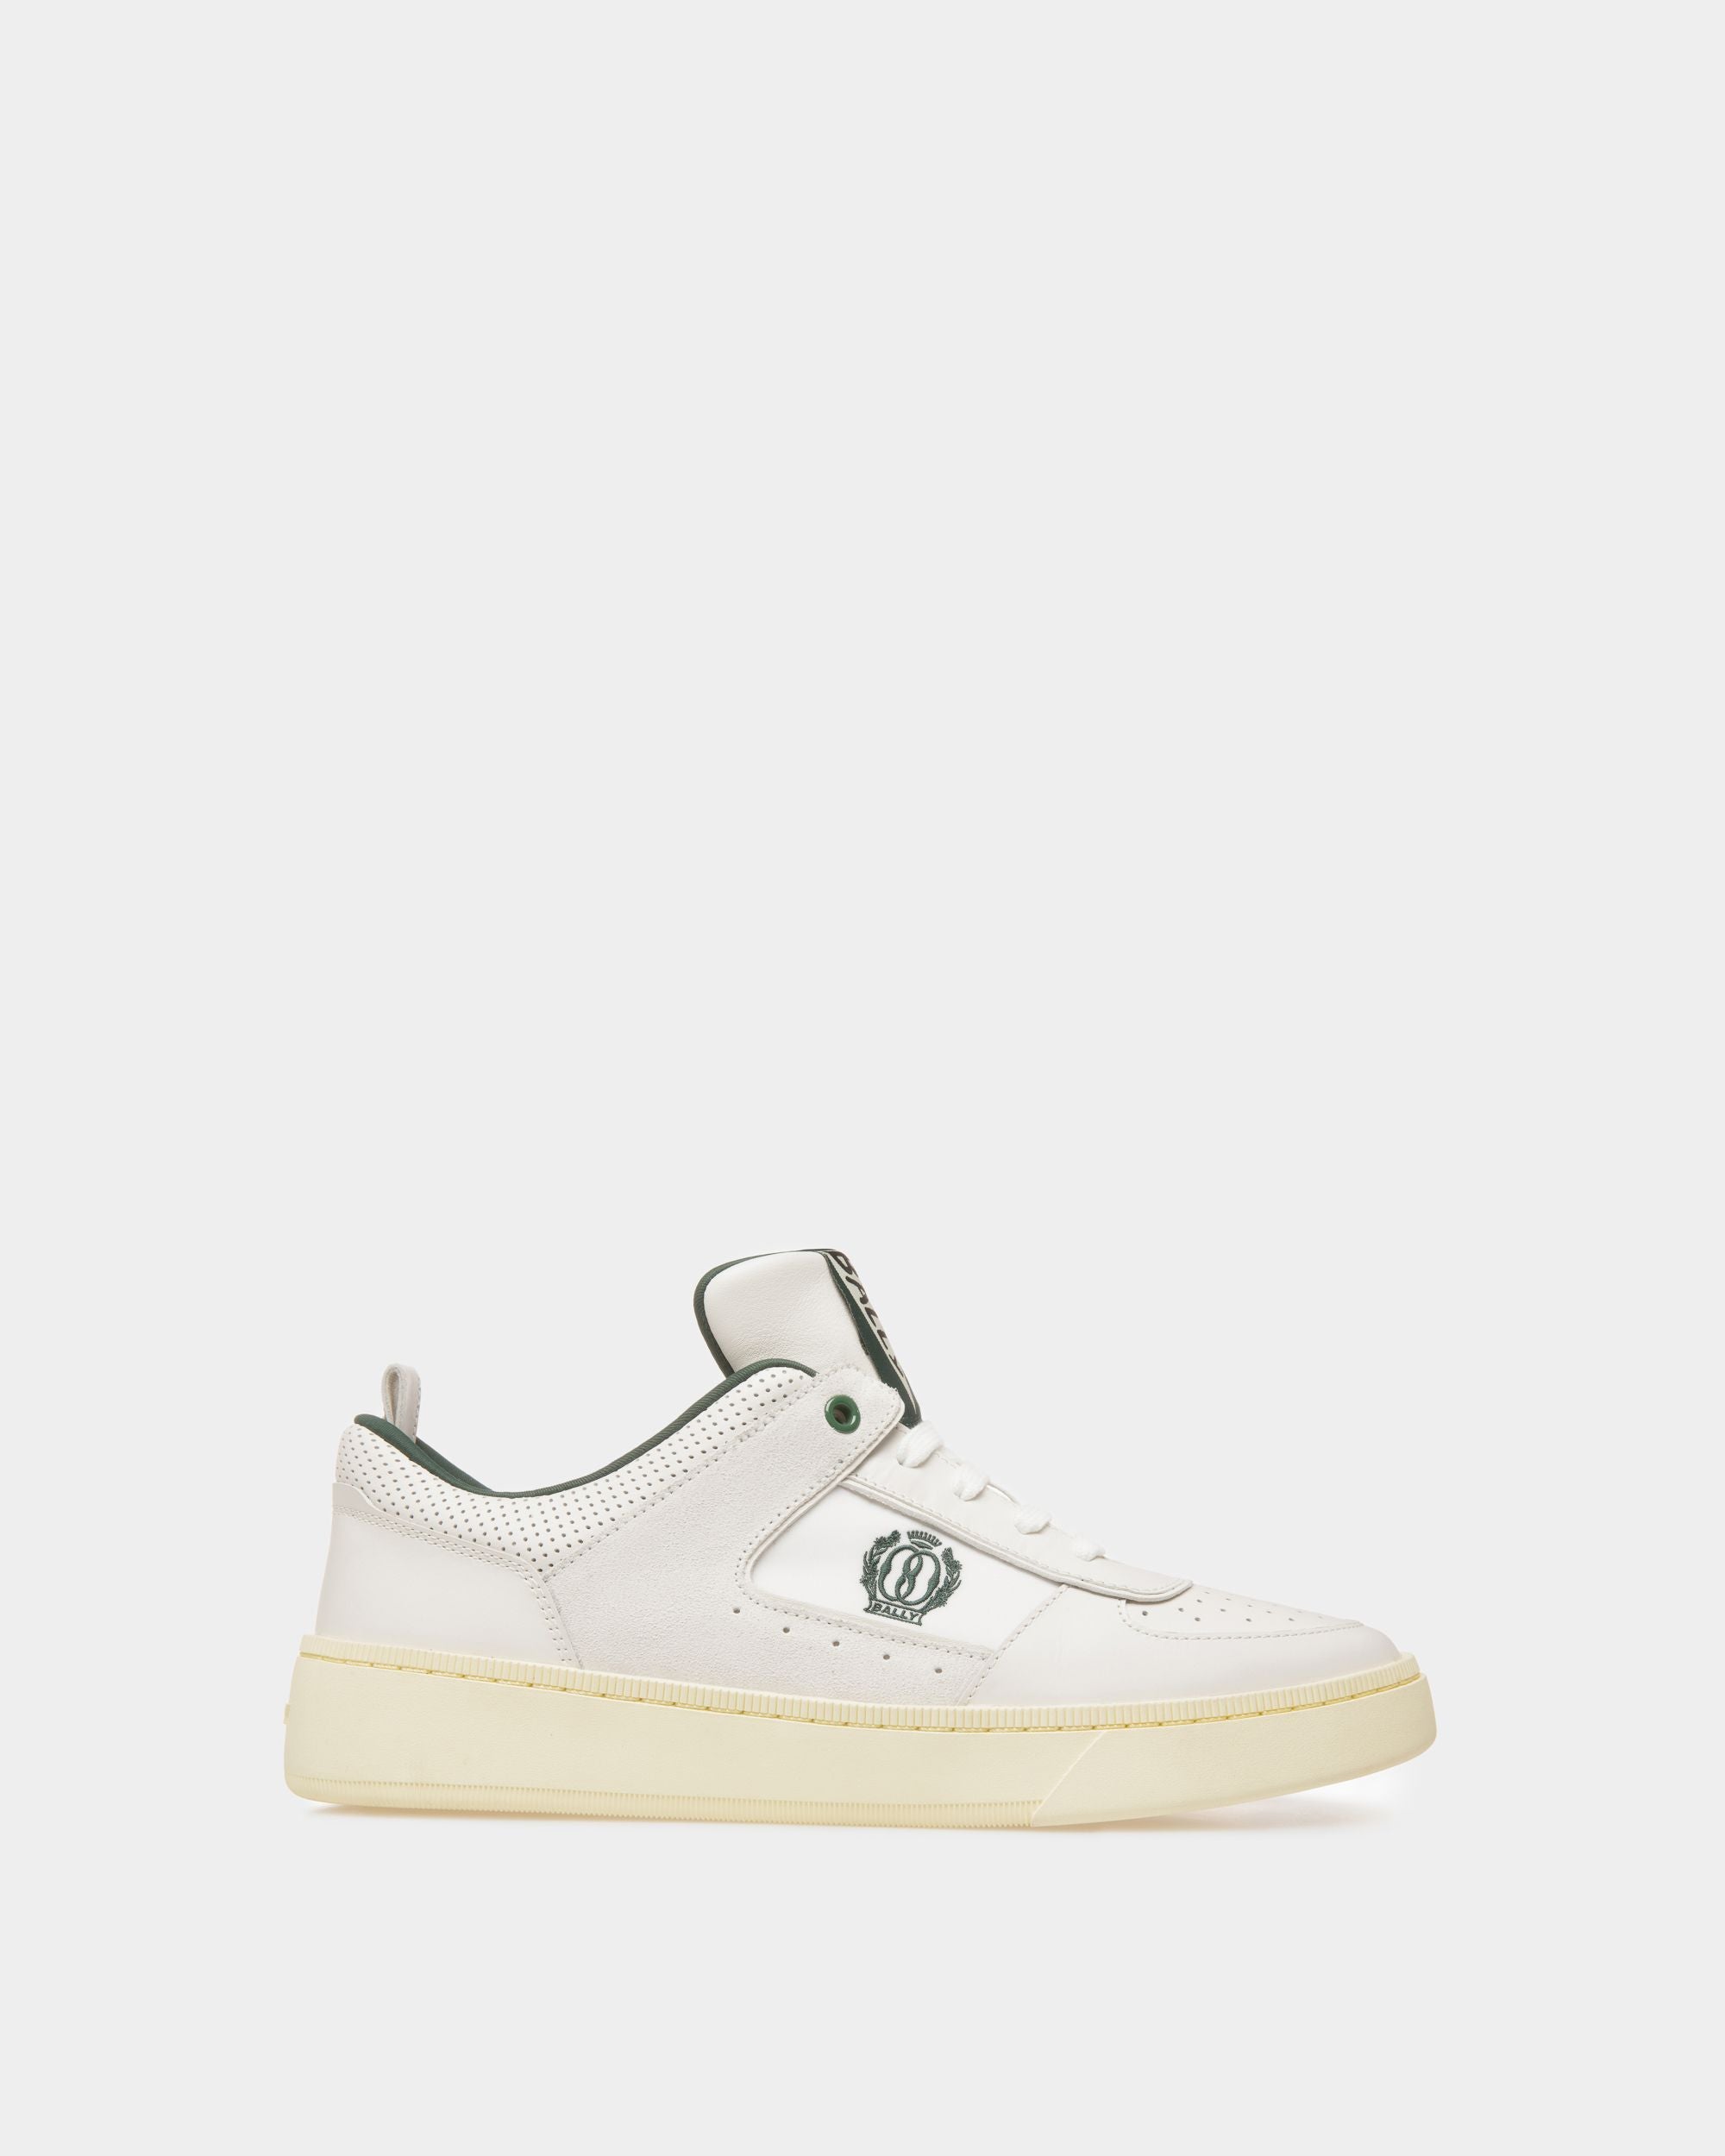 Riweira | Men's Sneakers | White Leather | Bally | Still Life Side